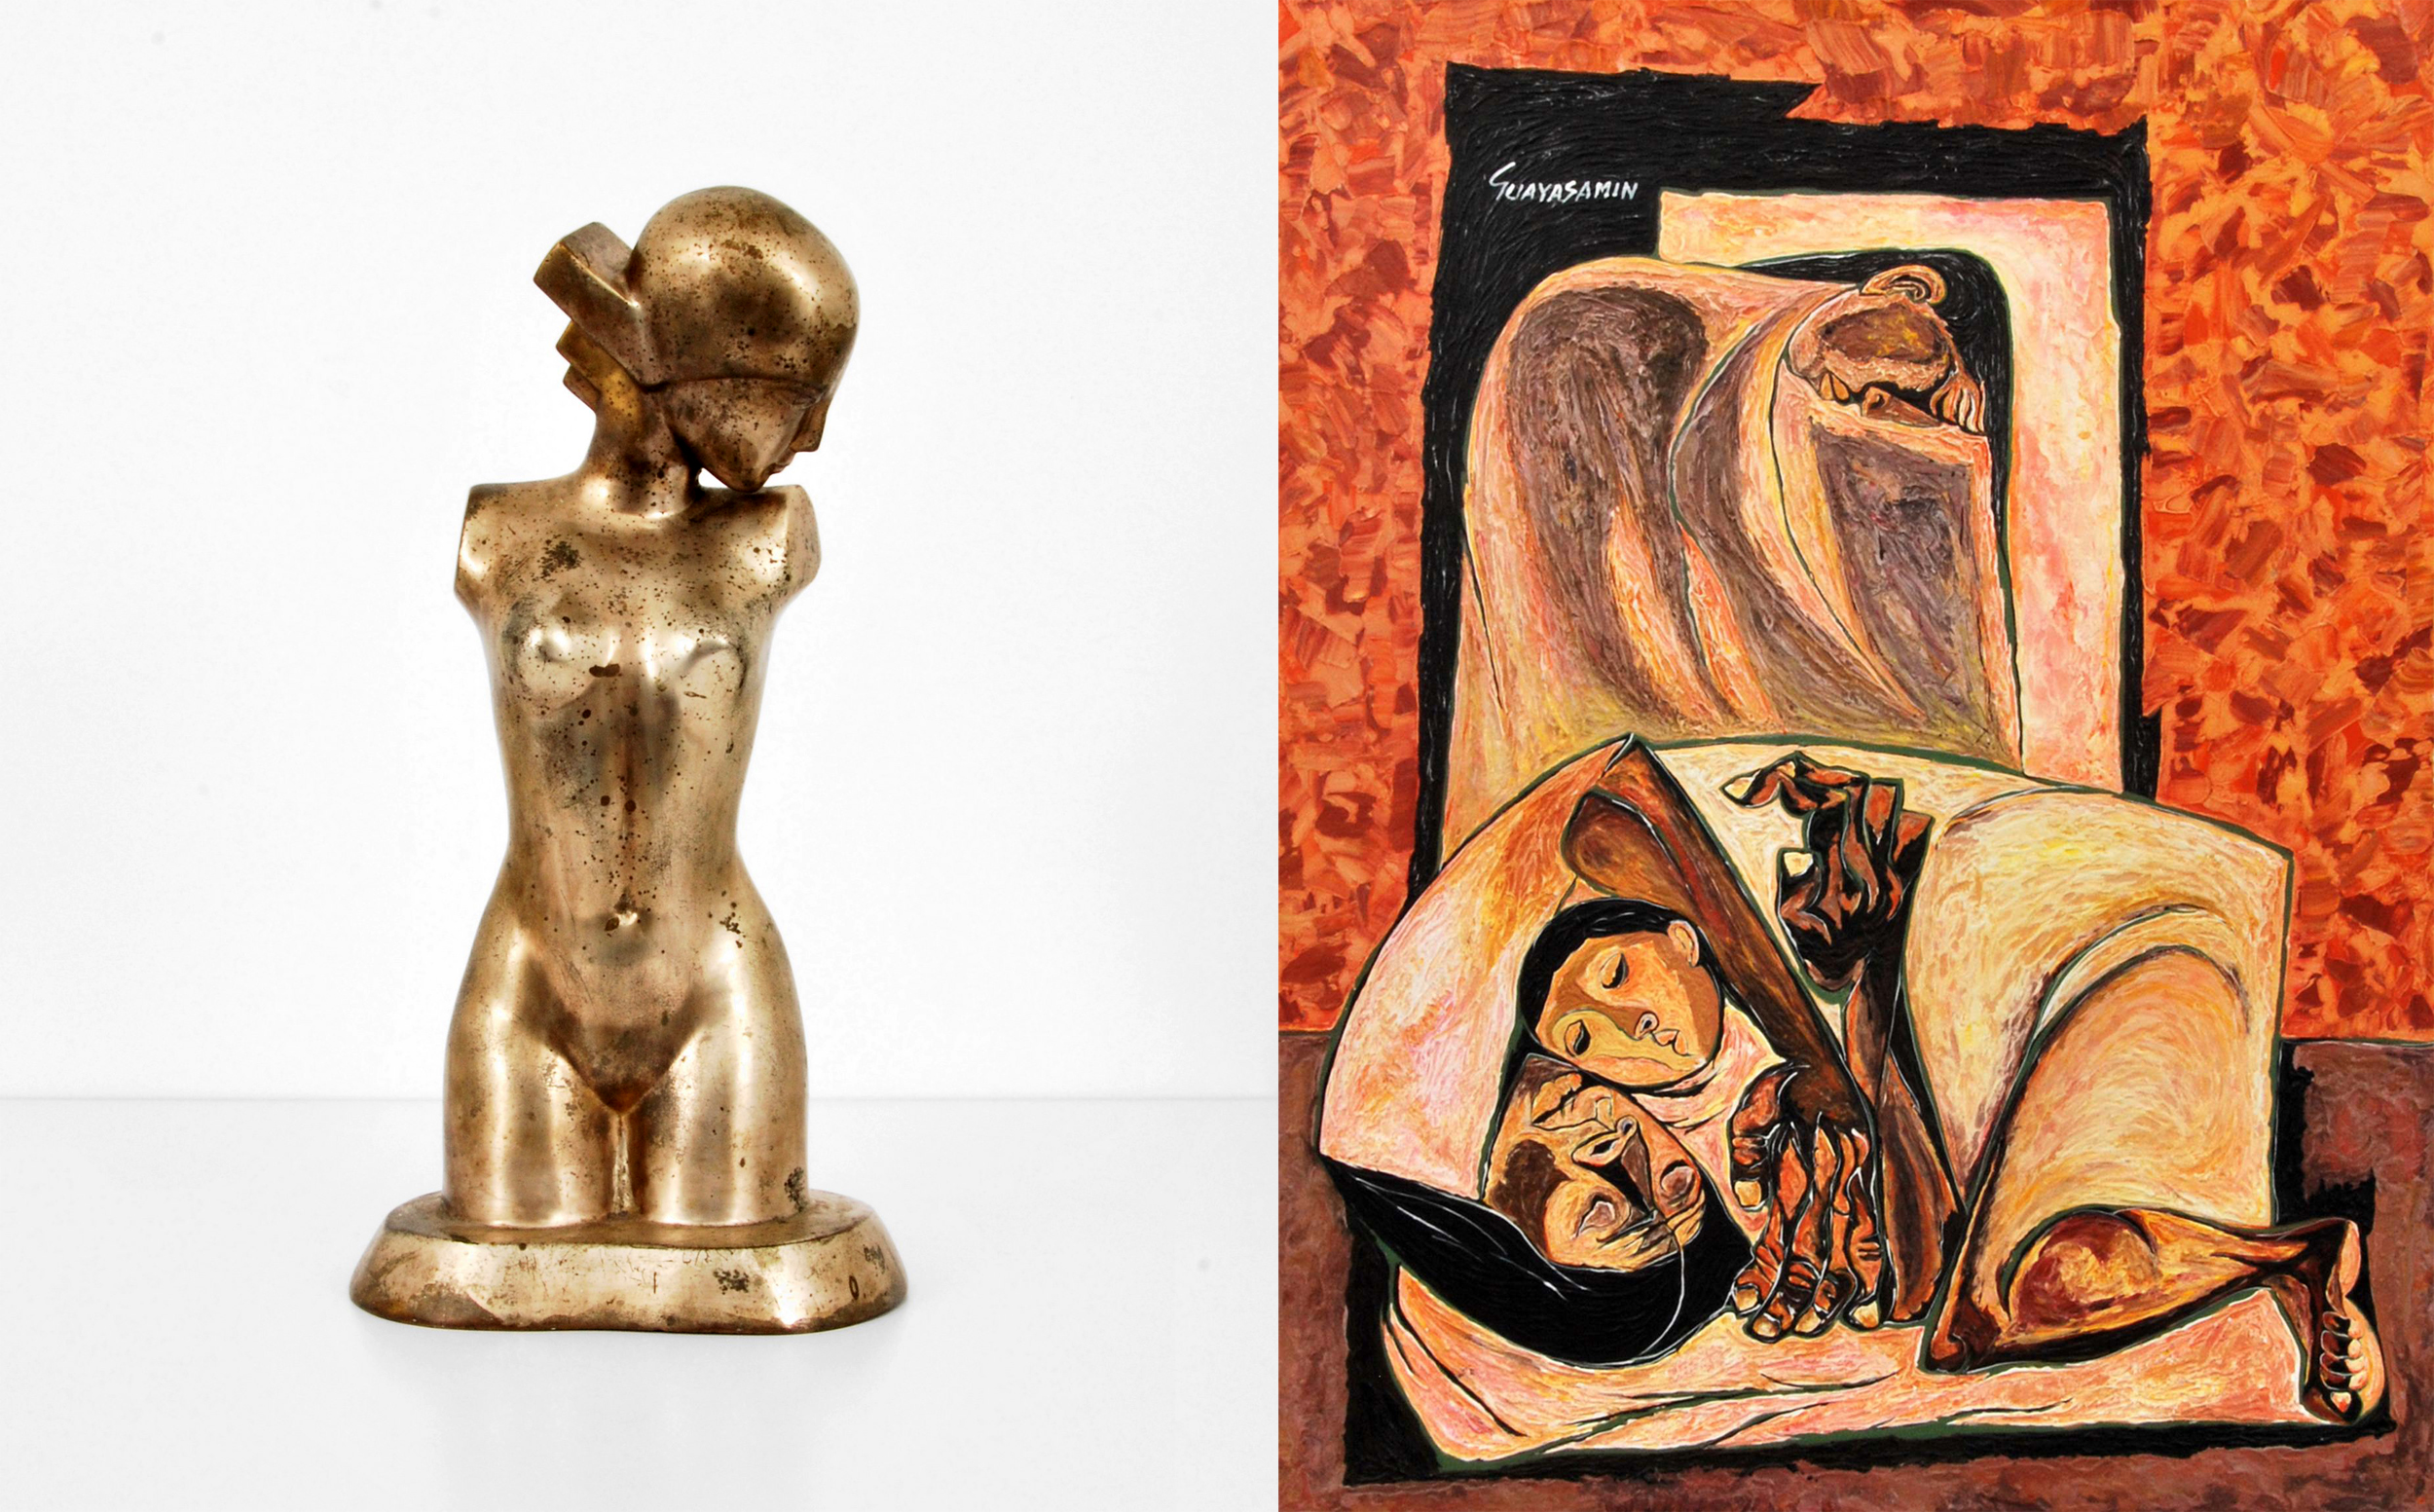 Boris Lovet-Lorski (Lithuanian, 1894-1973) Art Deco sculpture, ex Musee Luxembourg, $7,930; and Oswaldo Guayasamin (Ecuadorian, 1919-1999), original painting with COA from the Foundation Guayasamin, $39,040. Palm Beach Modern Auction image